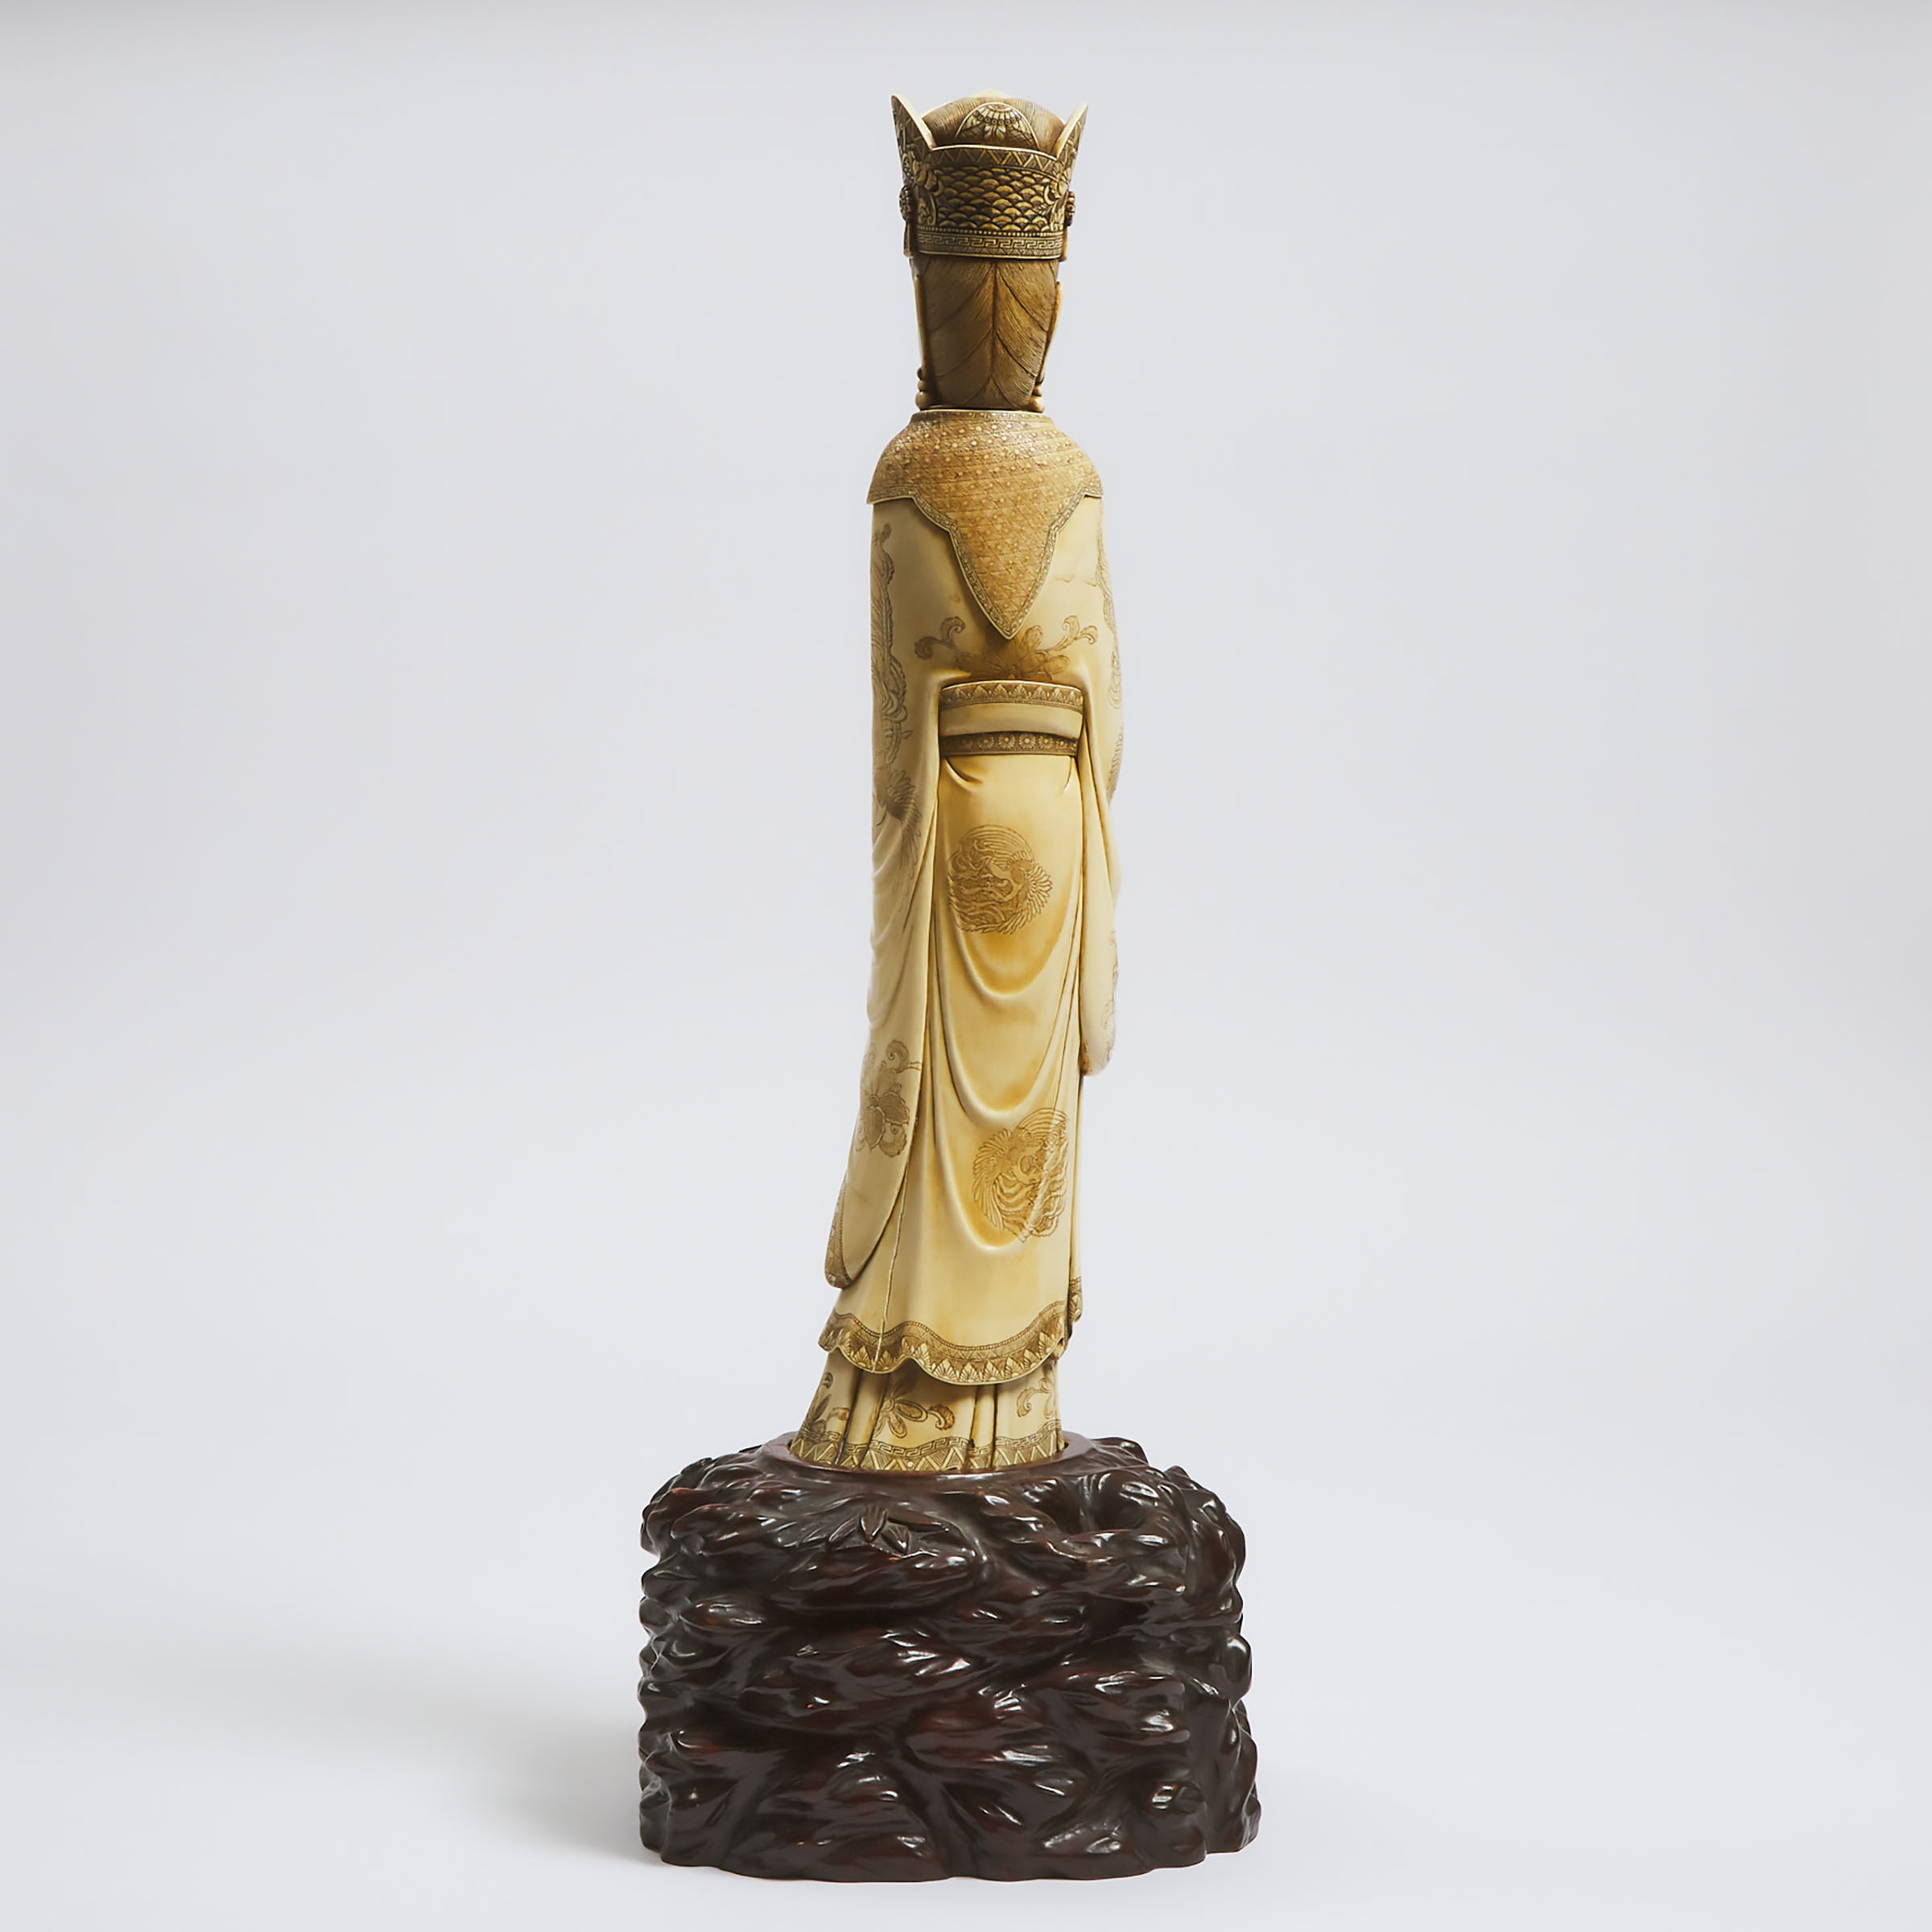 A Large Ivory Figure of an Empress, Early to Mid 20th Century